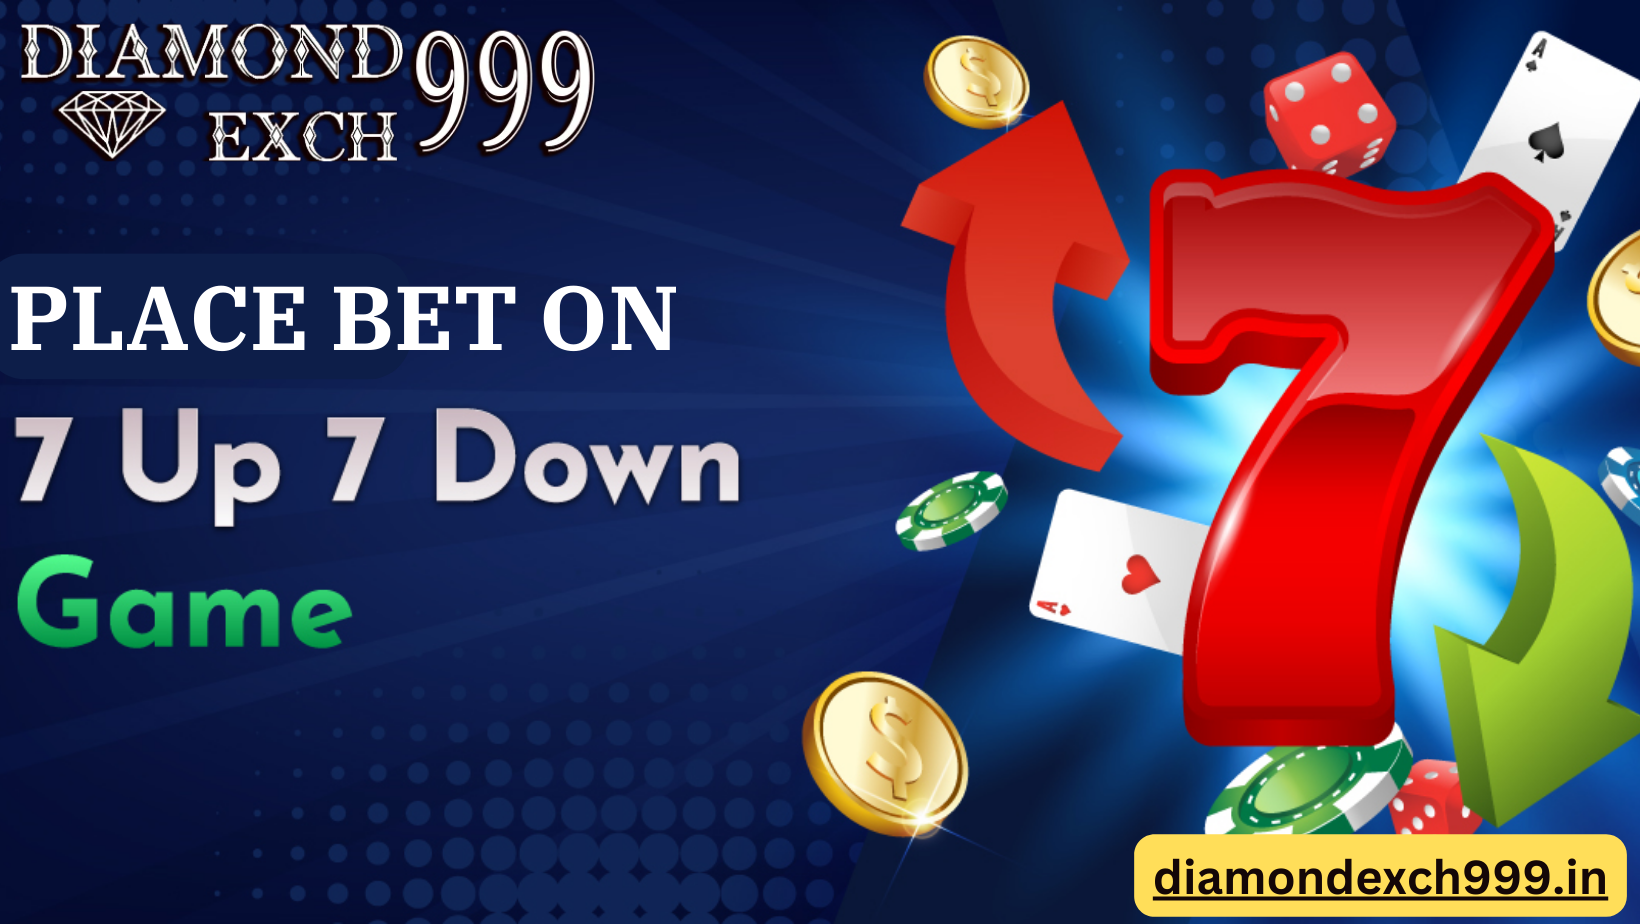 Diamondexch9 : Play 7 up 7 down Online Dice Game with Real Money